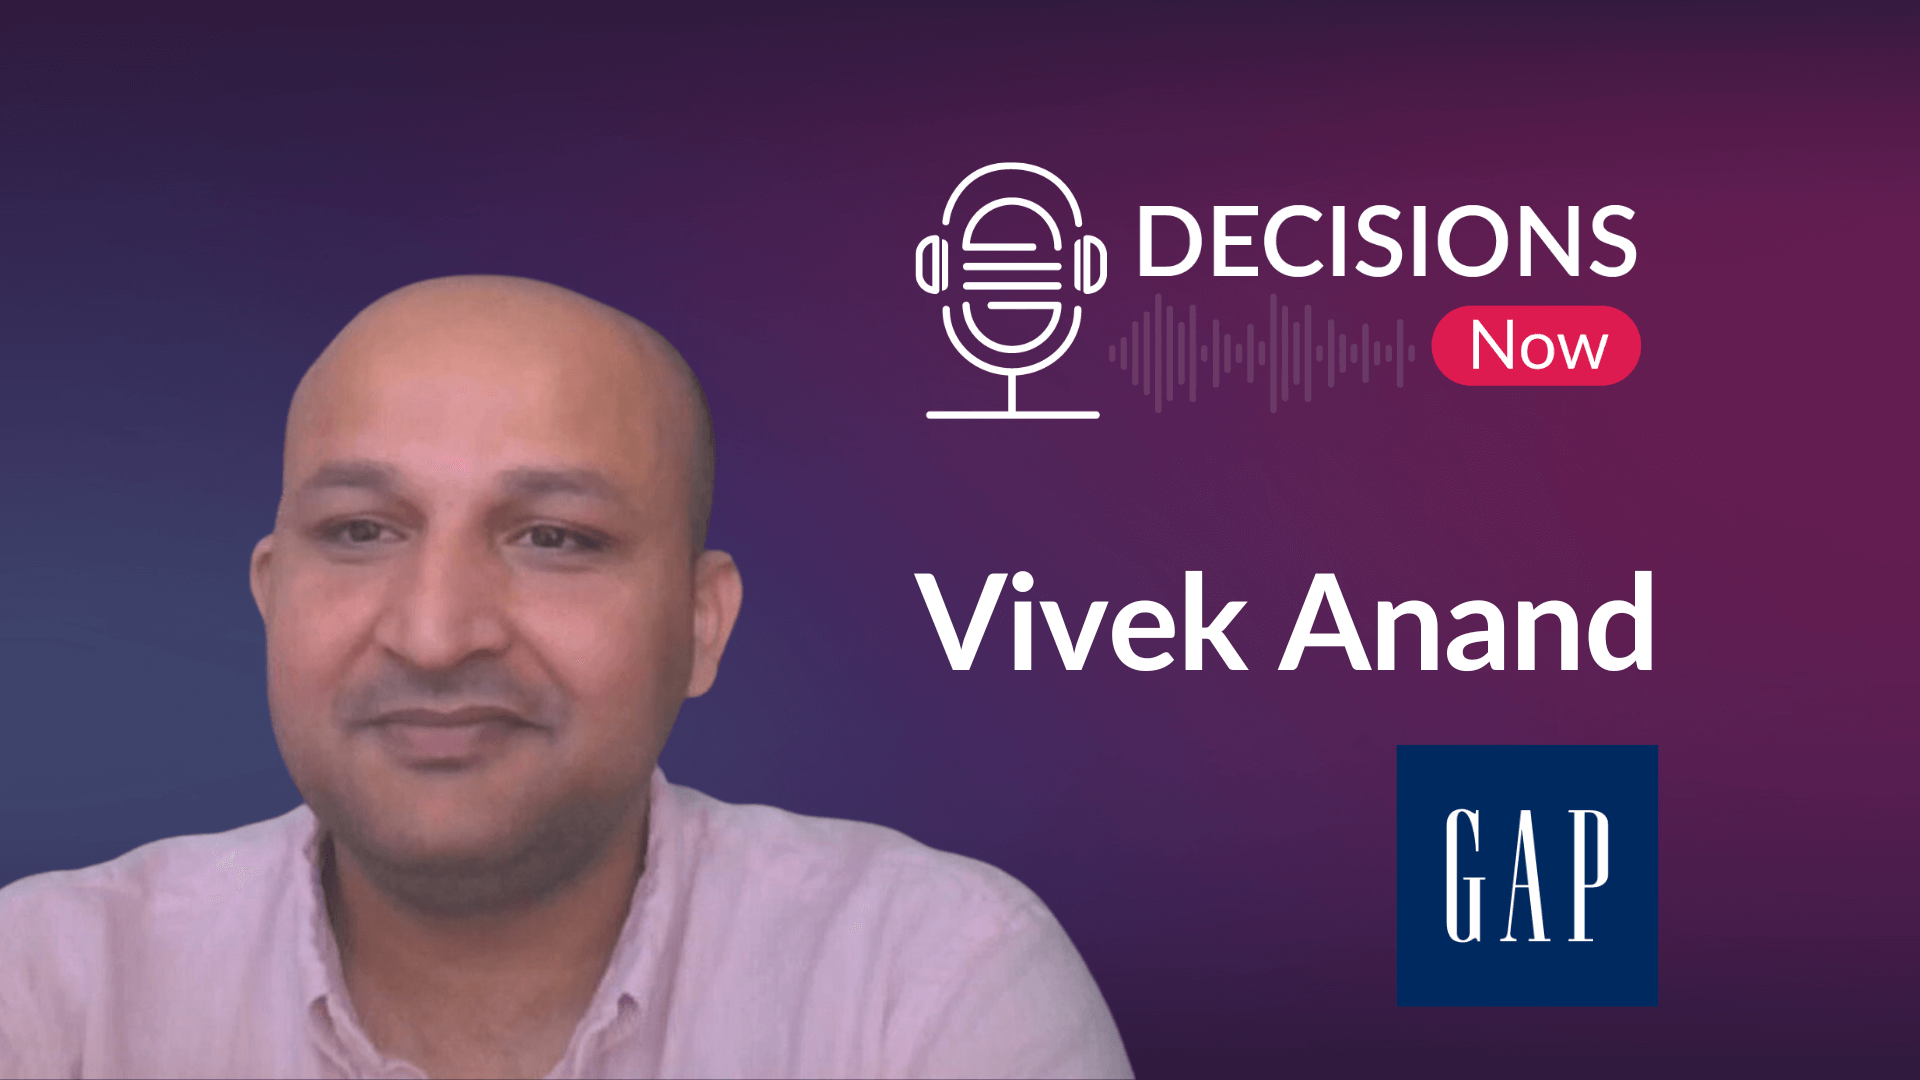 Decoding Retail Data with Vivek Anand, Director of Advanced Analytics at Gap